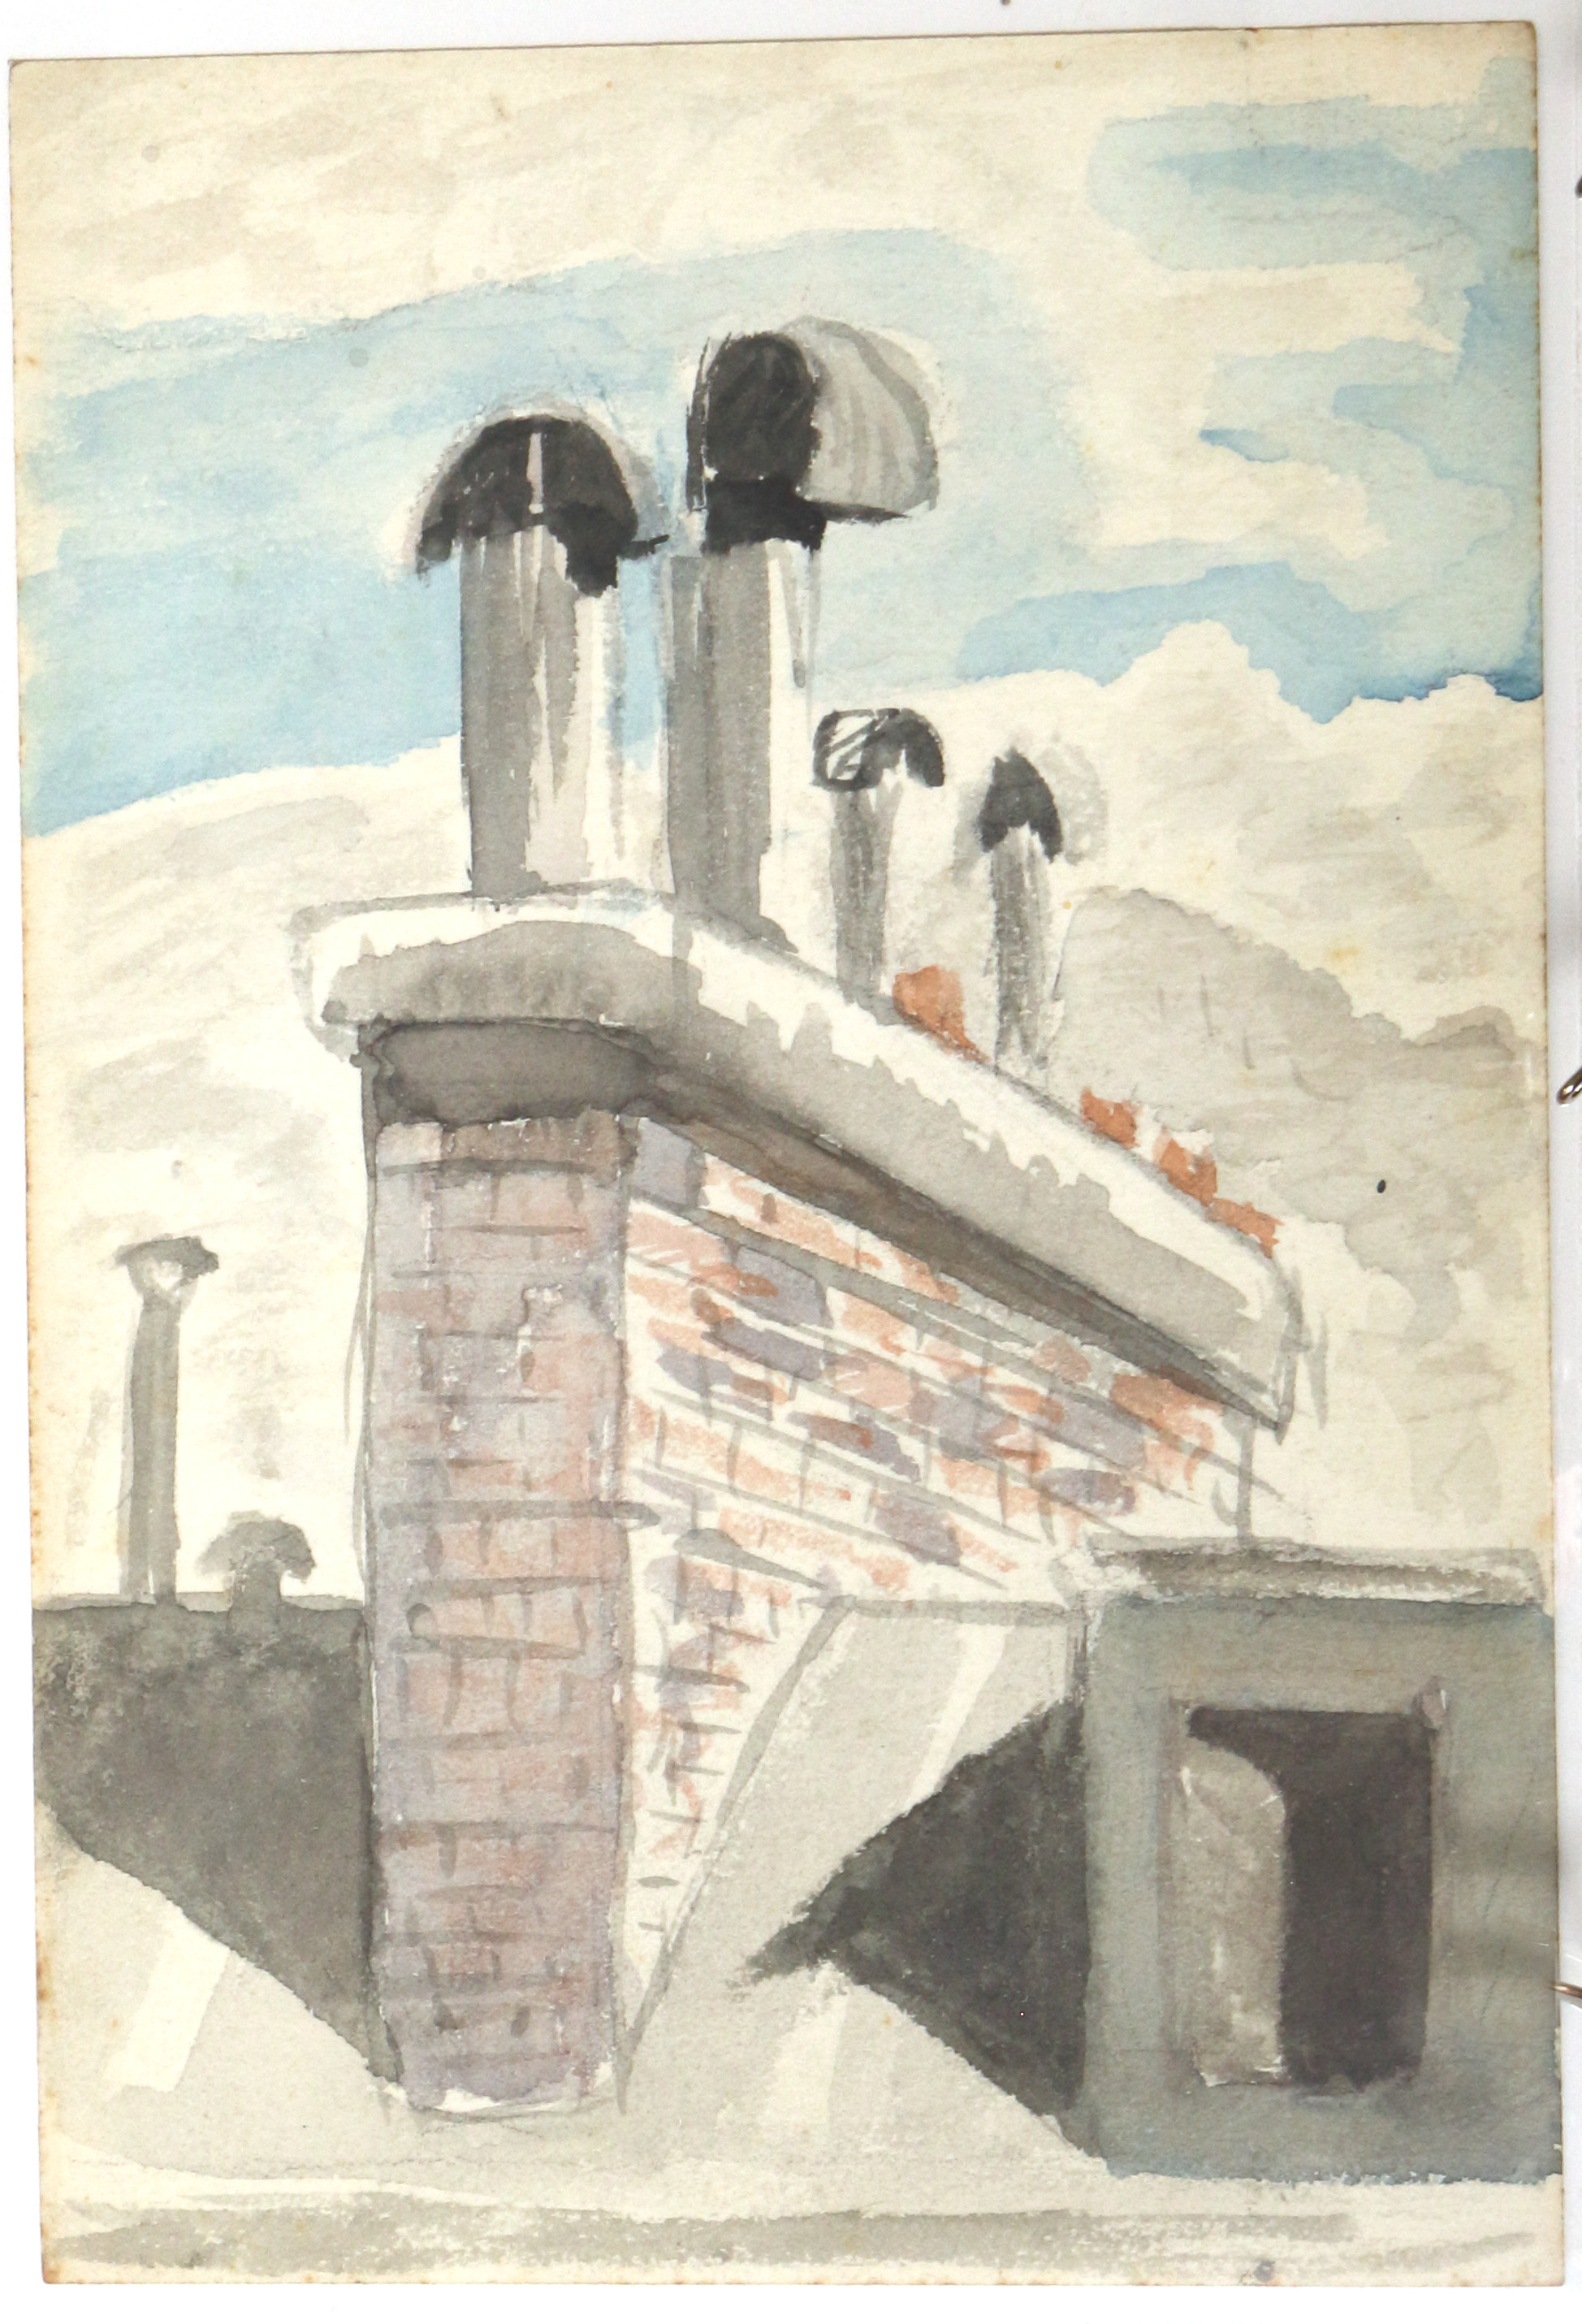 Watercolor.  Clear day with brick chimney.  Jean Charlot.